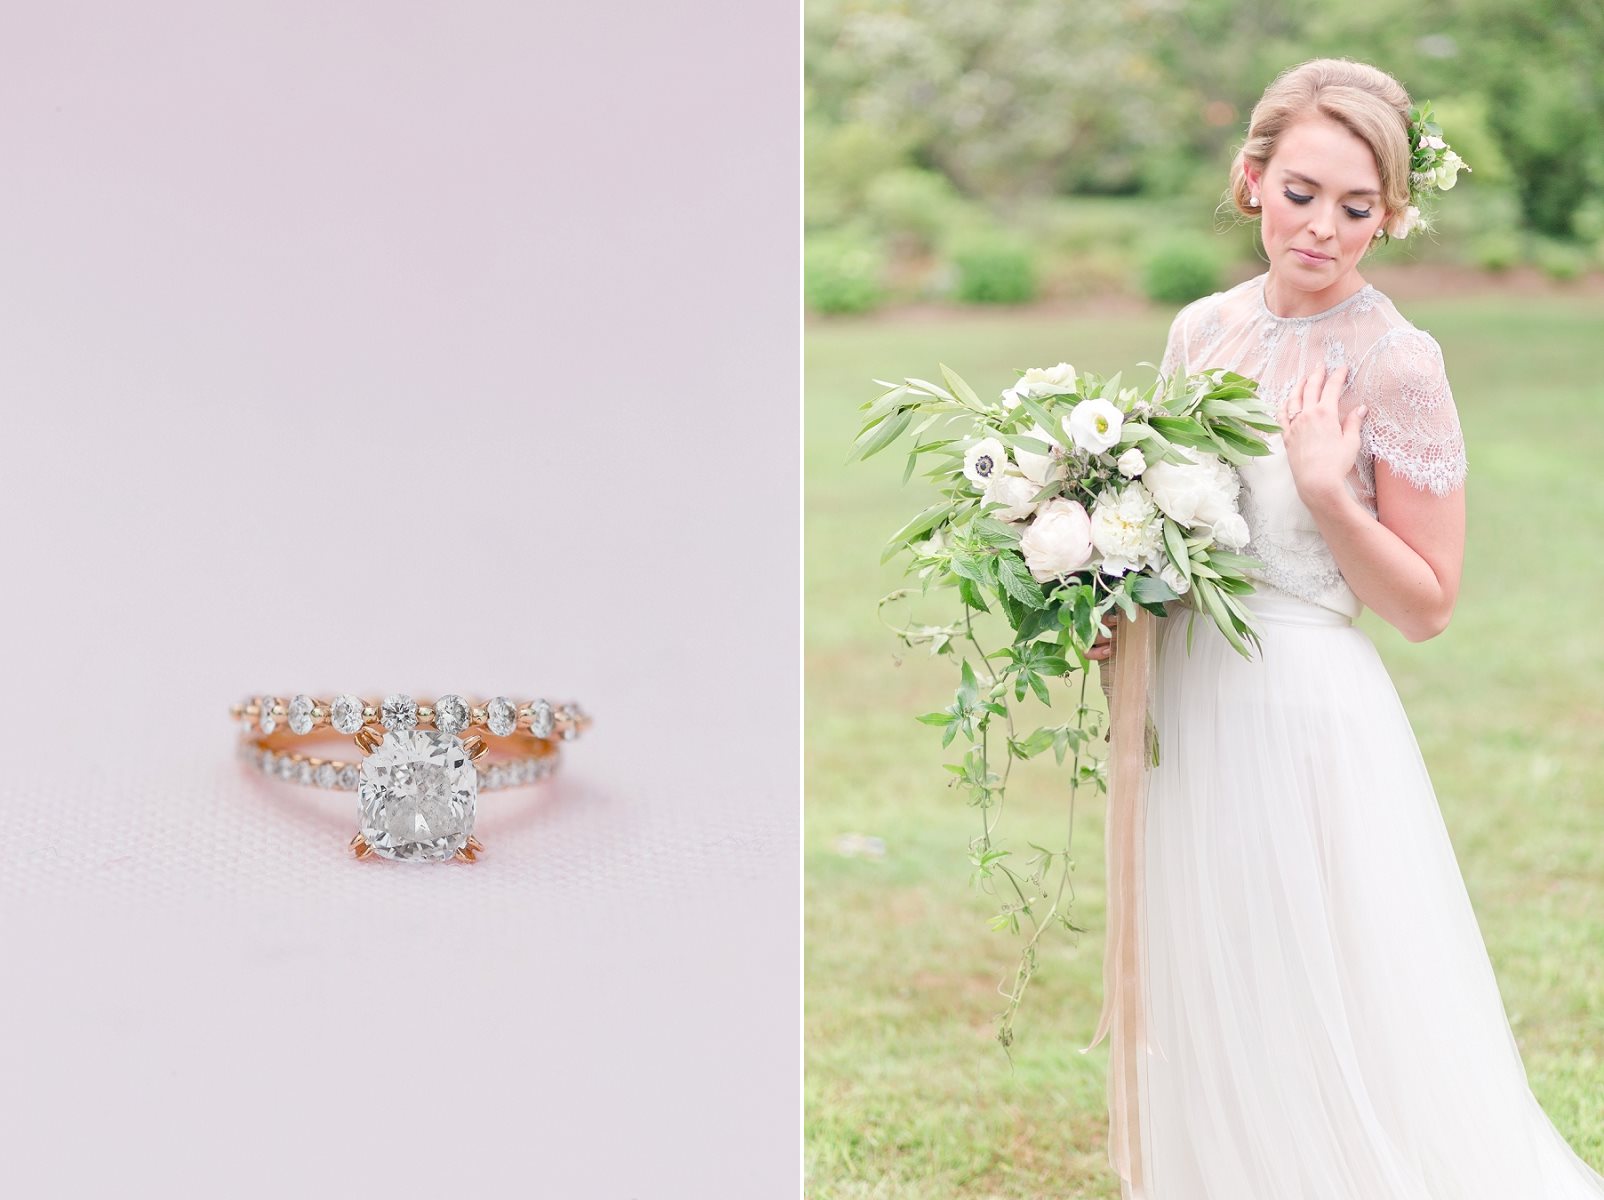 Rose Gold Engagement Ring - Romantic Spring Wedding Inspiration in Pretty Pastels and Rose Gold